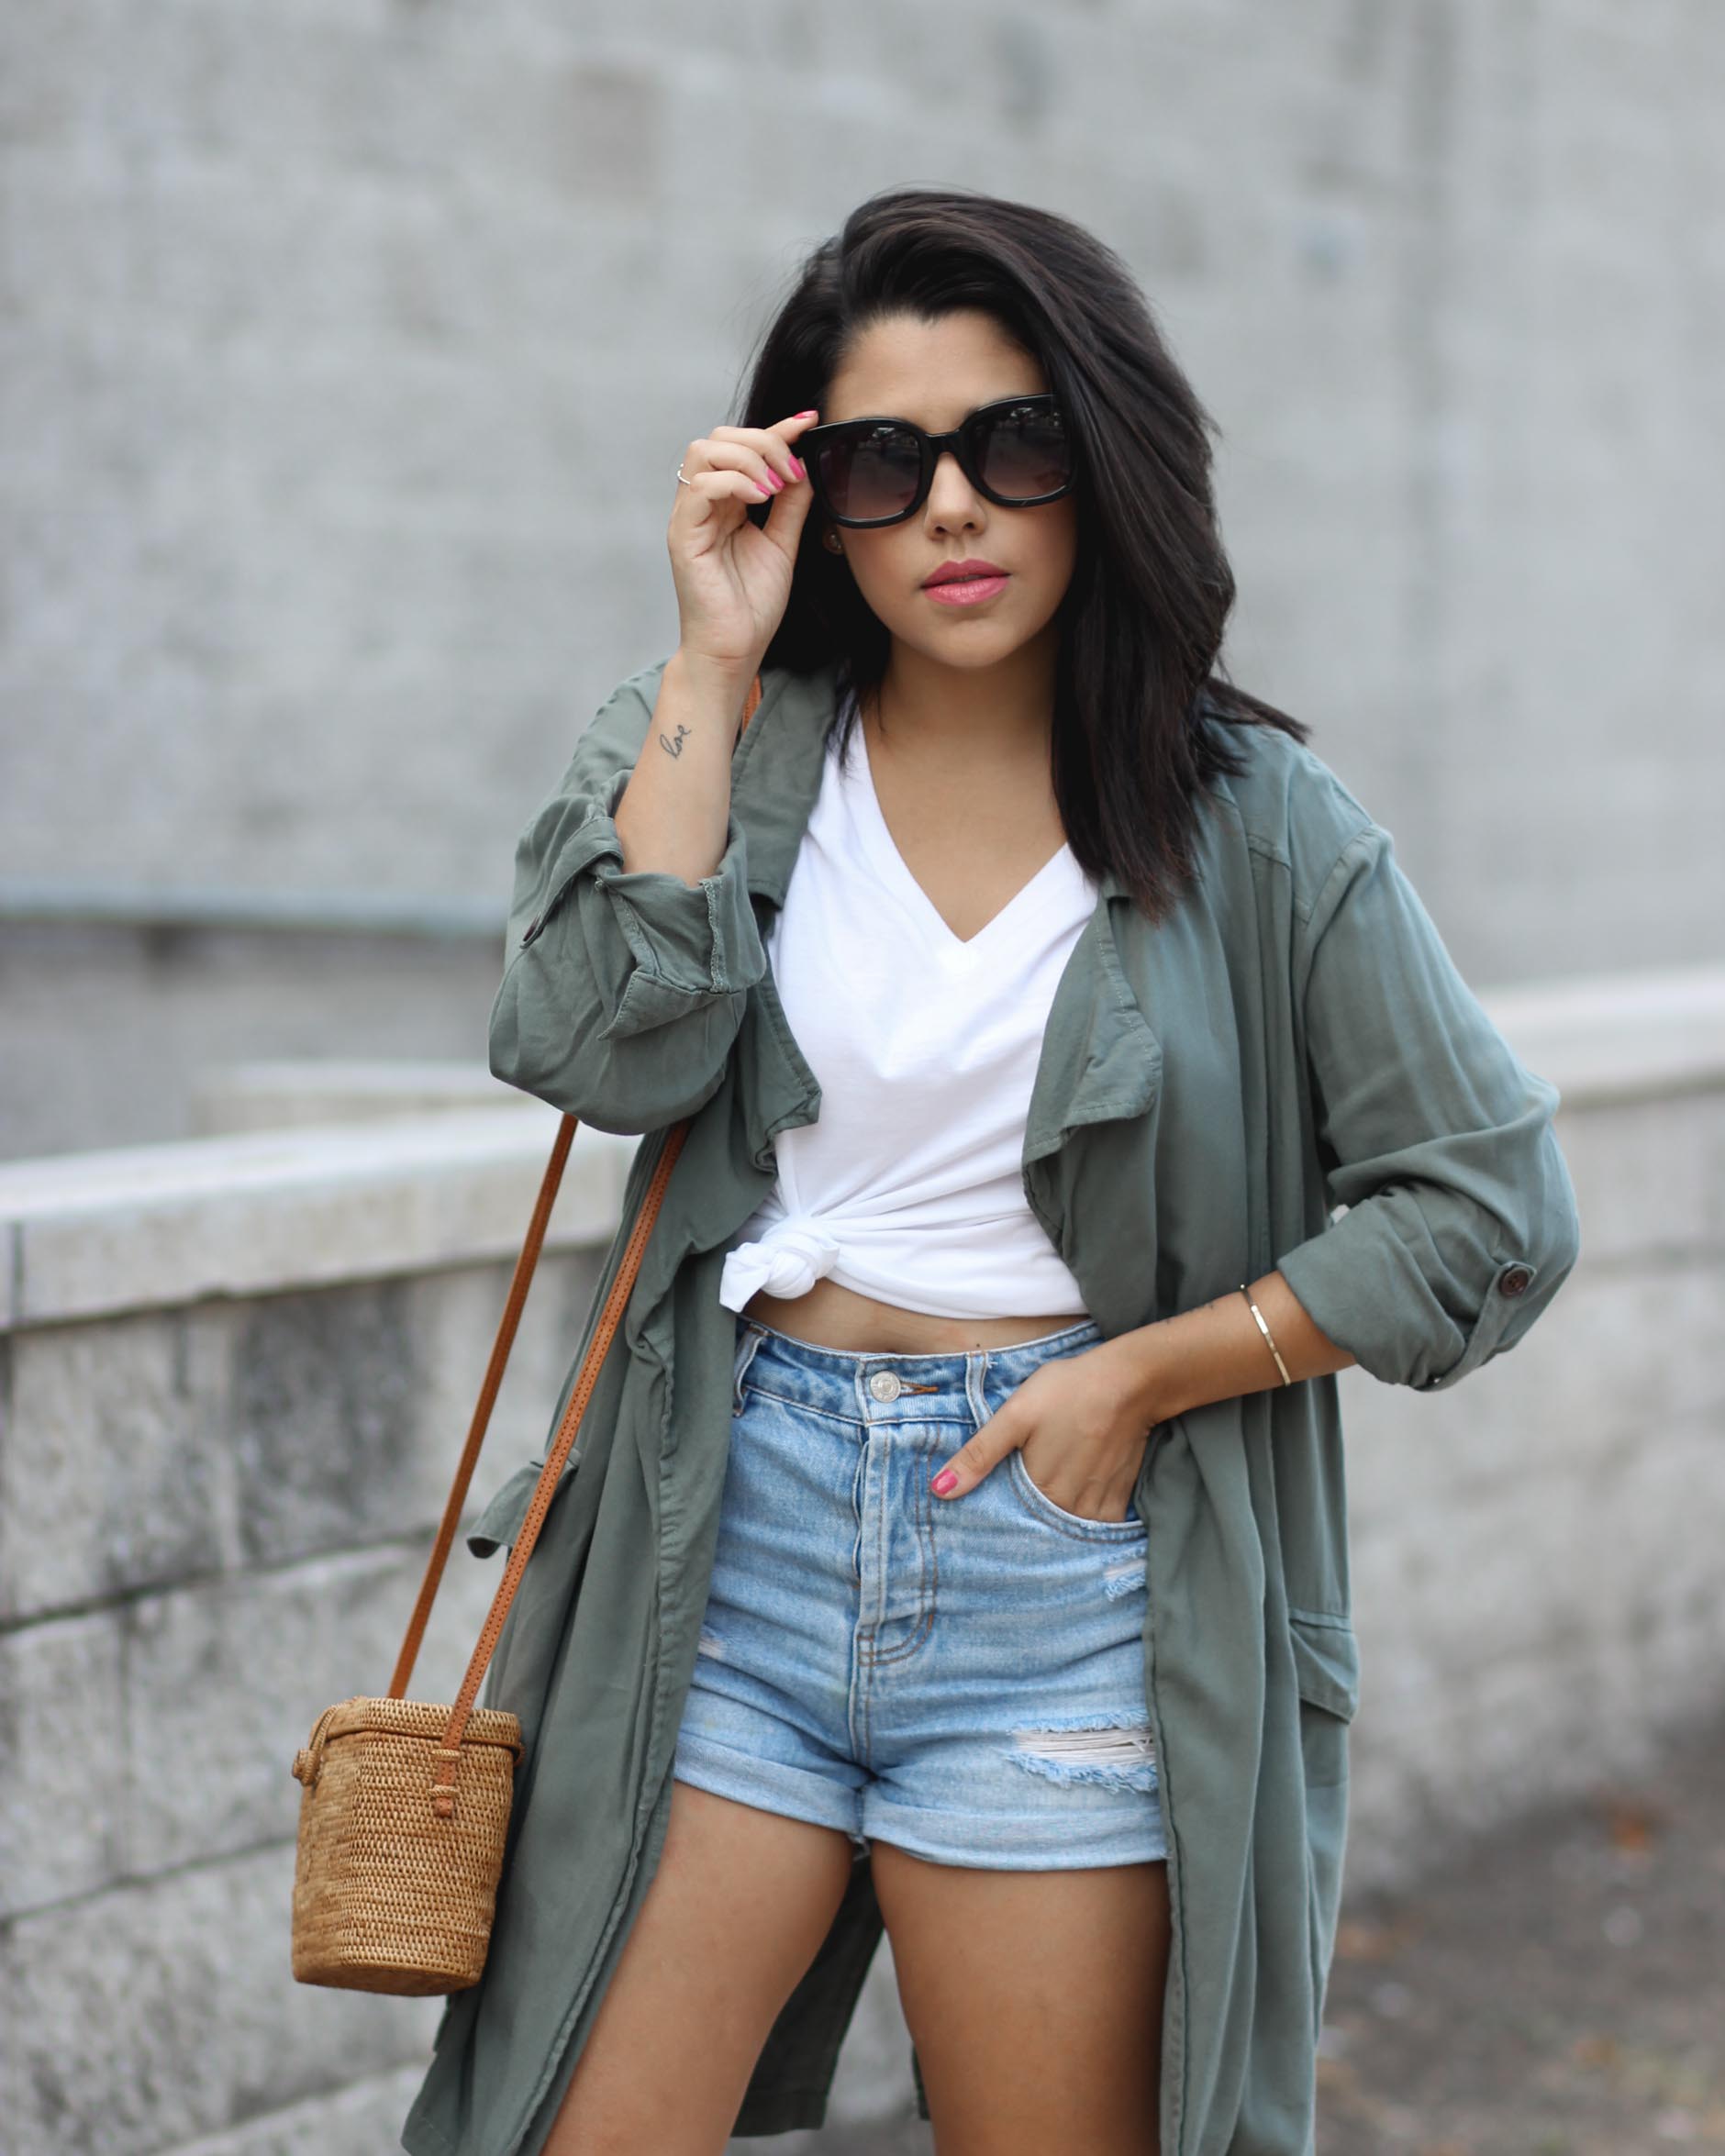 lifestyle blogger naty michele wearing a knotted tee with a trench coat and denim shorts holding her sunglasses